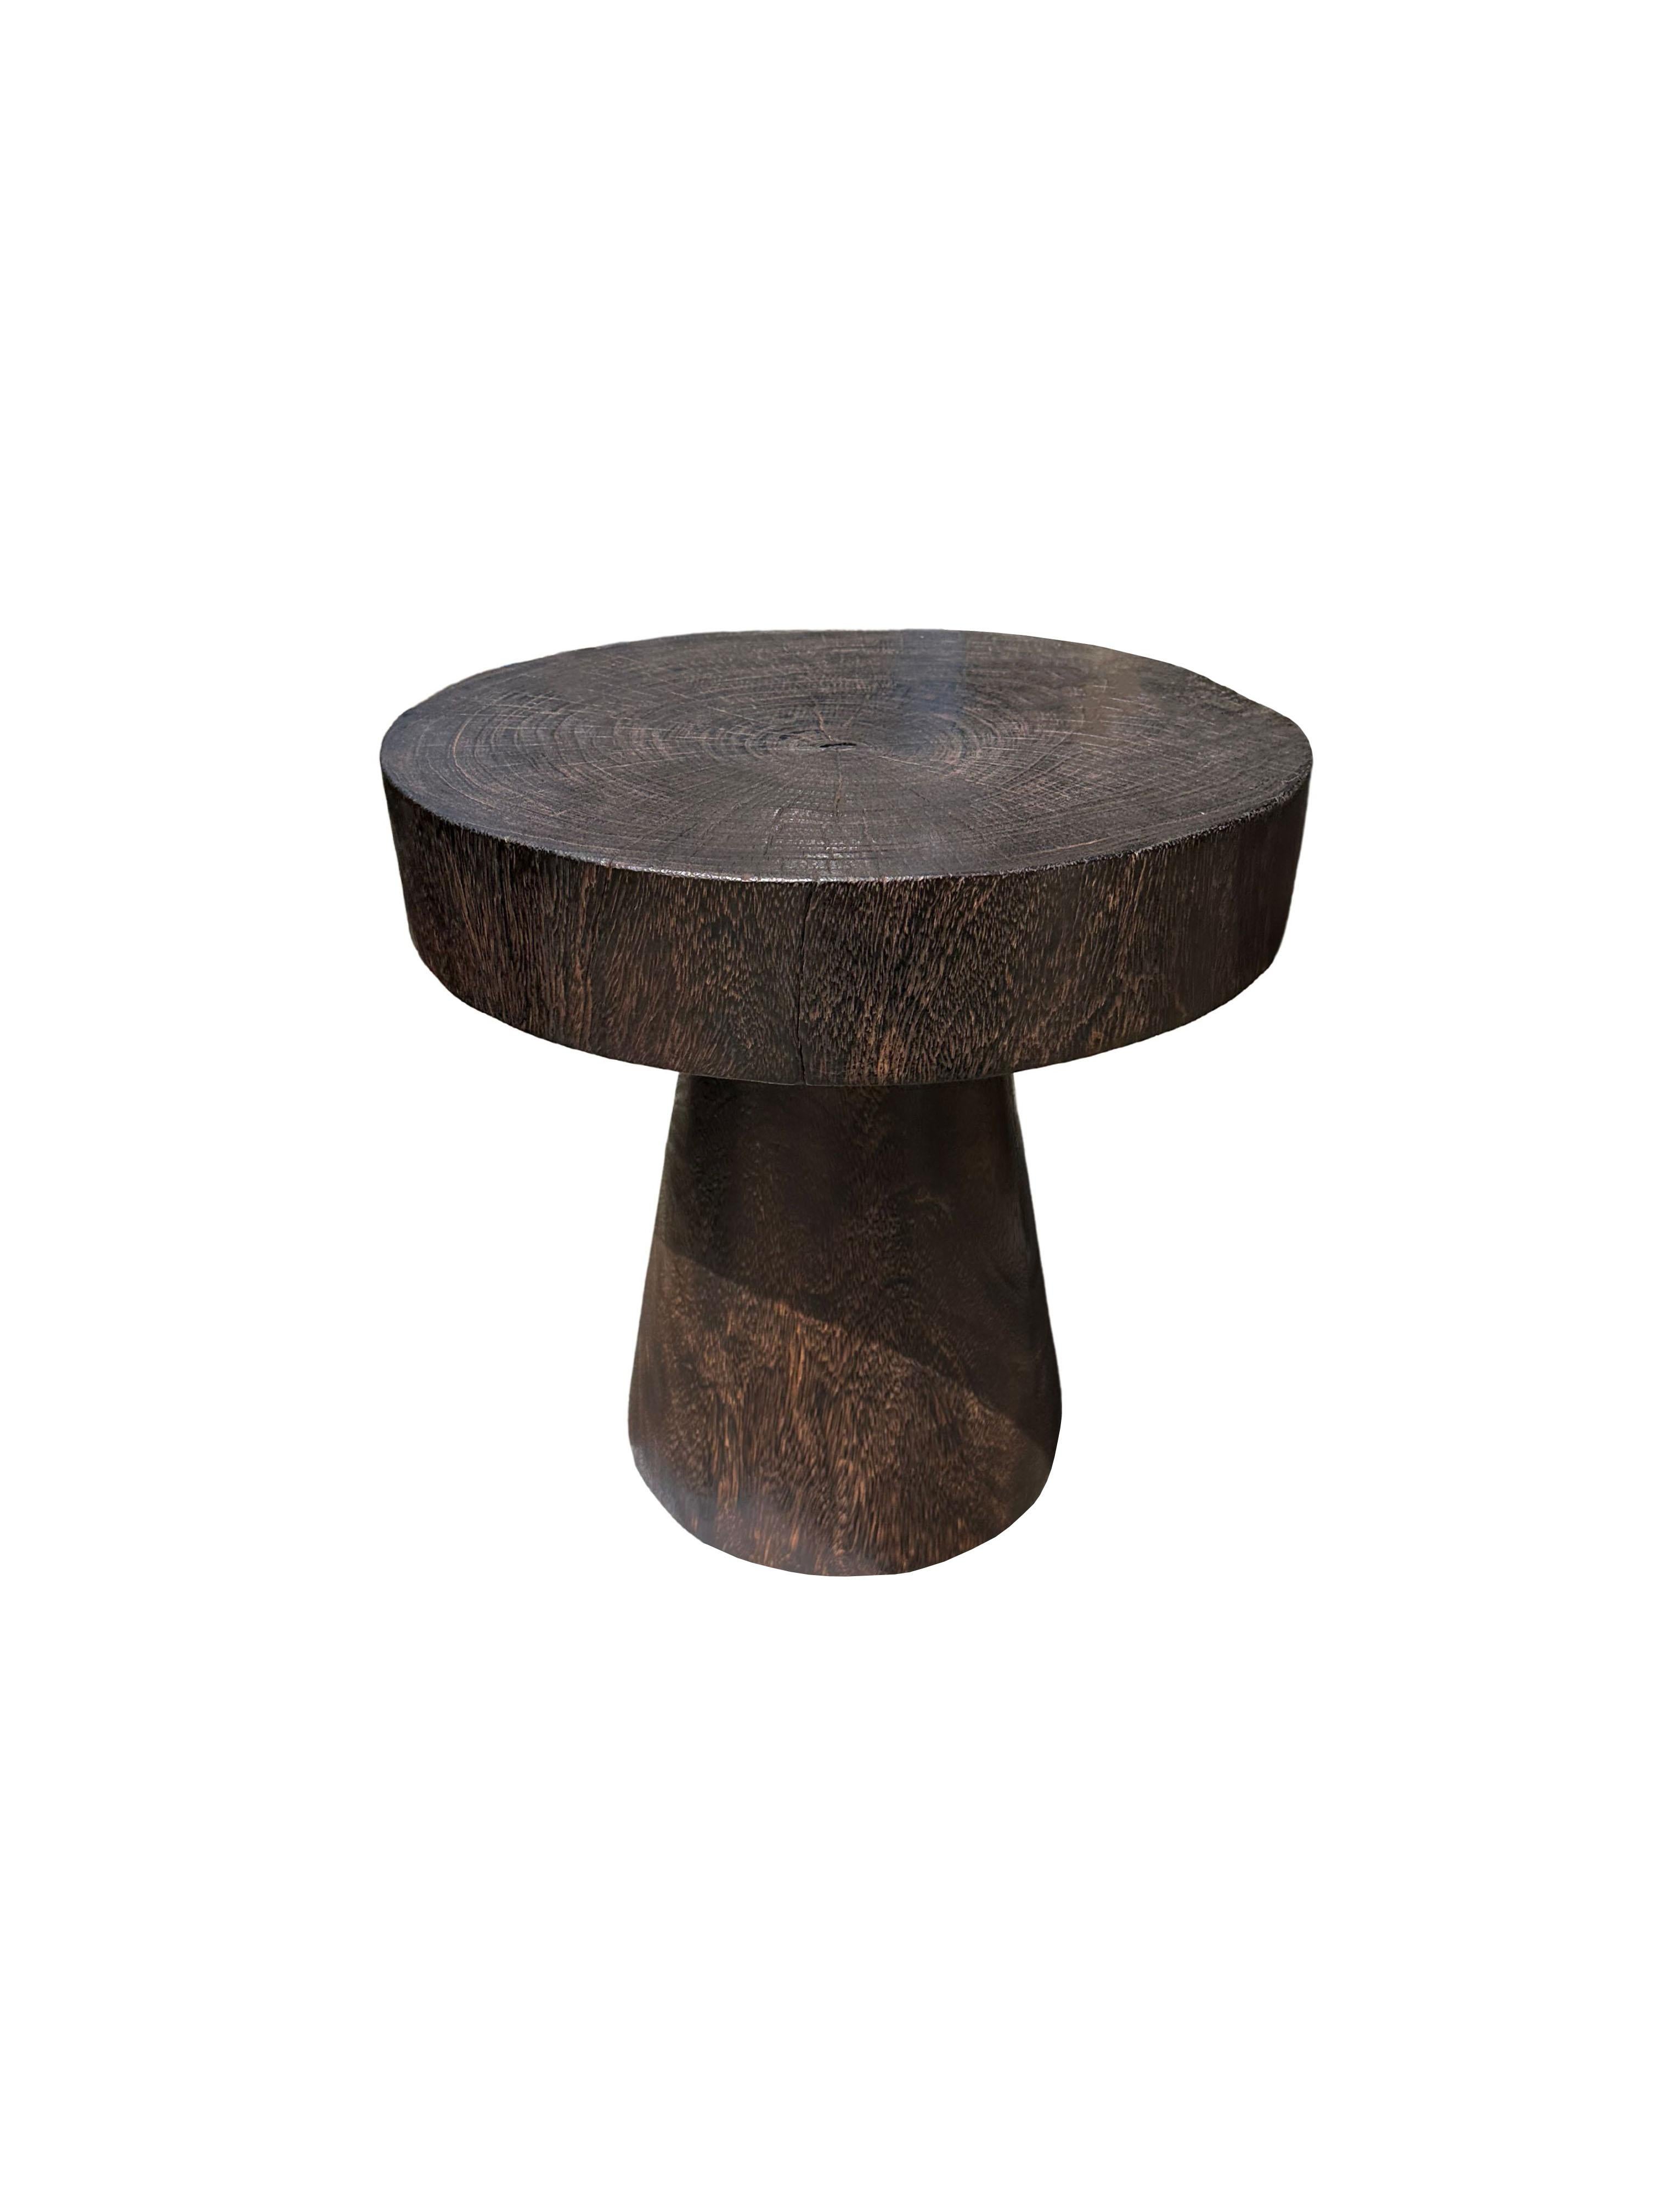 Indonesian Sculptural Round Table Crafted from Solid Suar Wood, Natural Finish For Sale